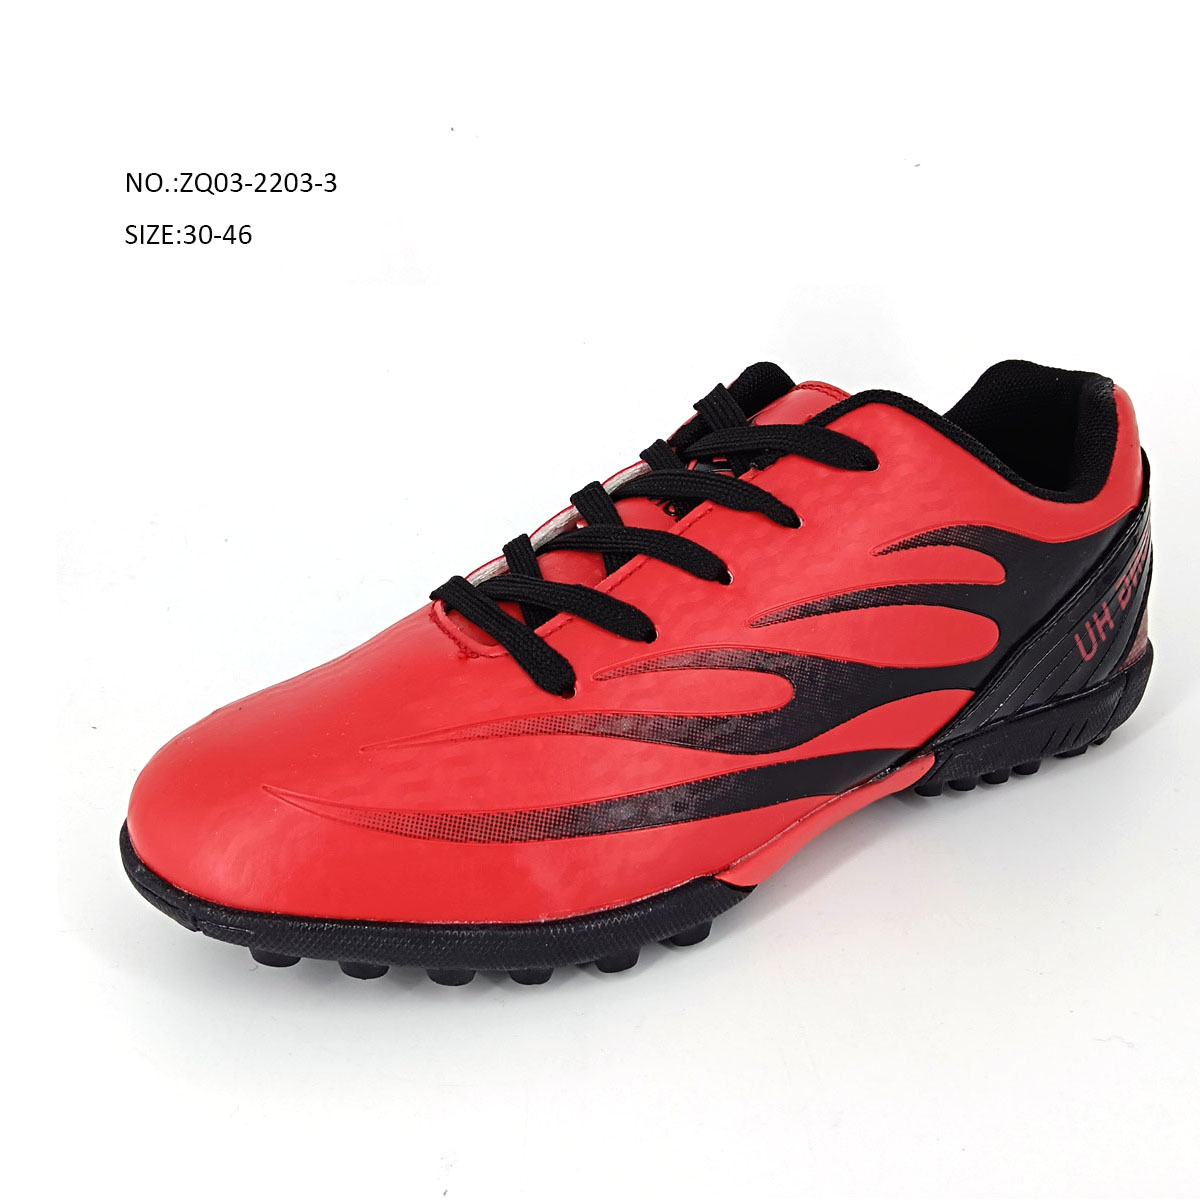 High quality football nail indoor general training shoes 1. ITEM...